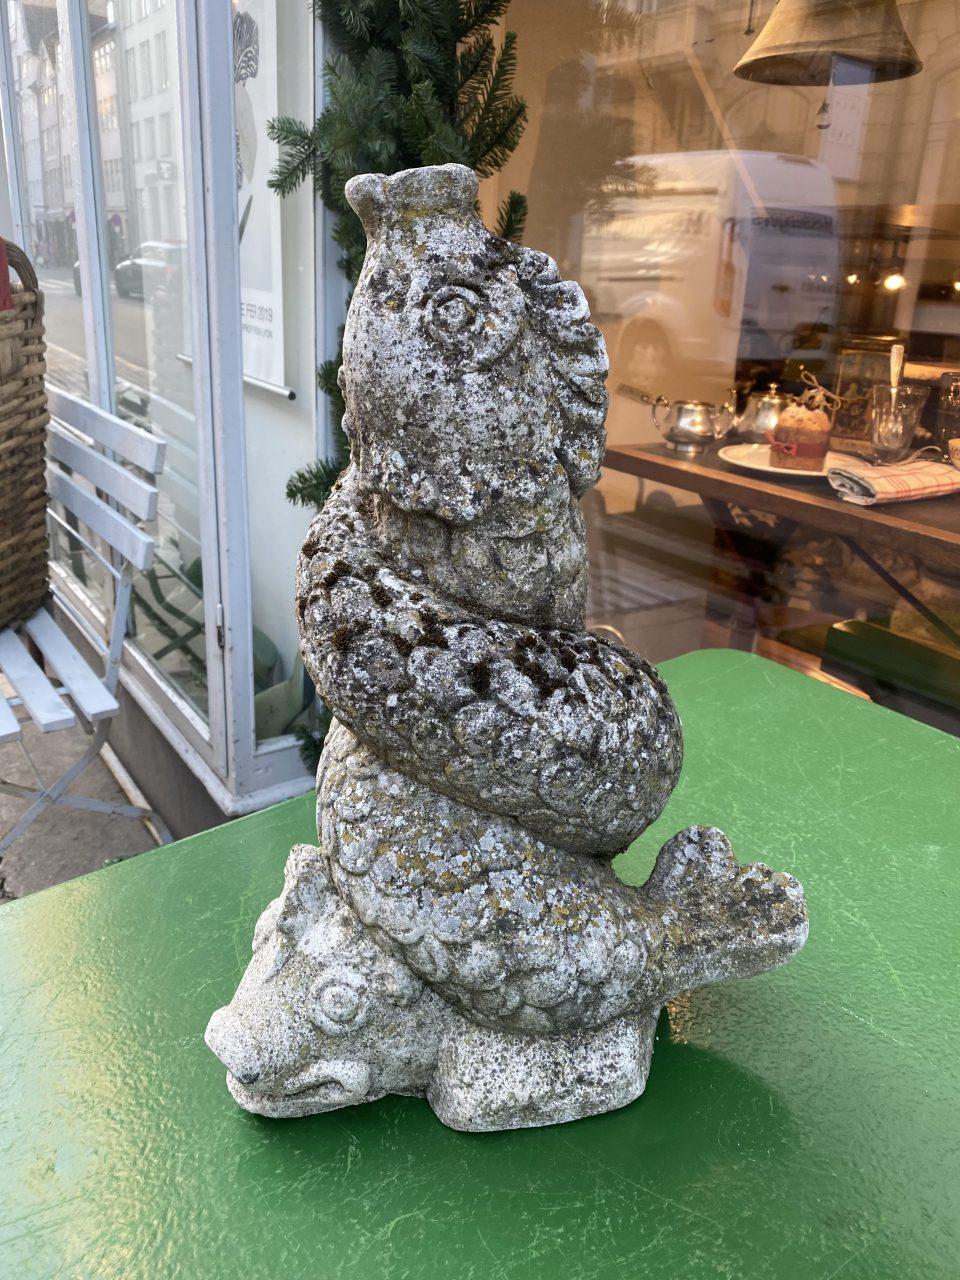 Romantic old French weathered cement figure from the South of France. The figure depicts two fish-like fabled creatures tightly entwined.

The figure has previously stood in the middle of a mirror pond / basin in a distinguished French garden, and